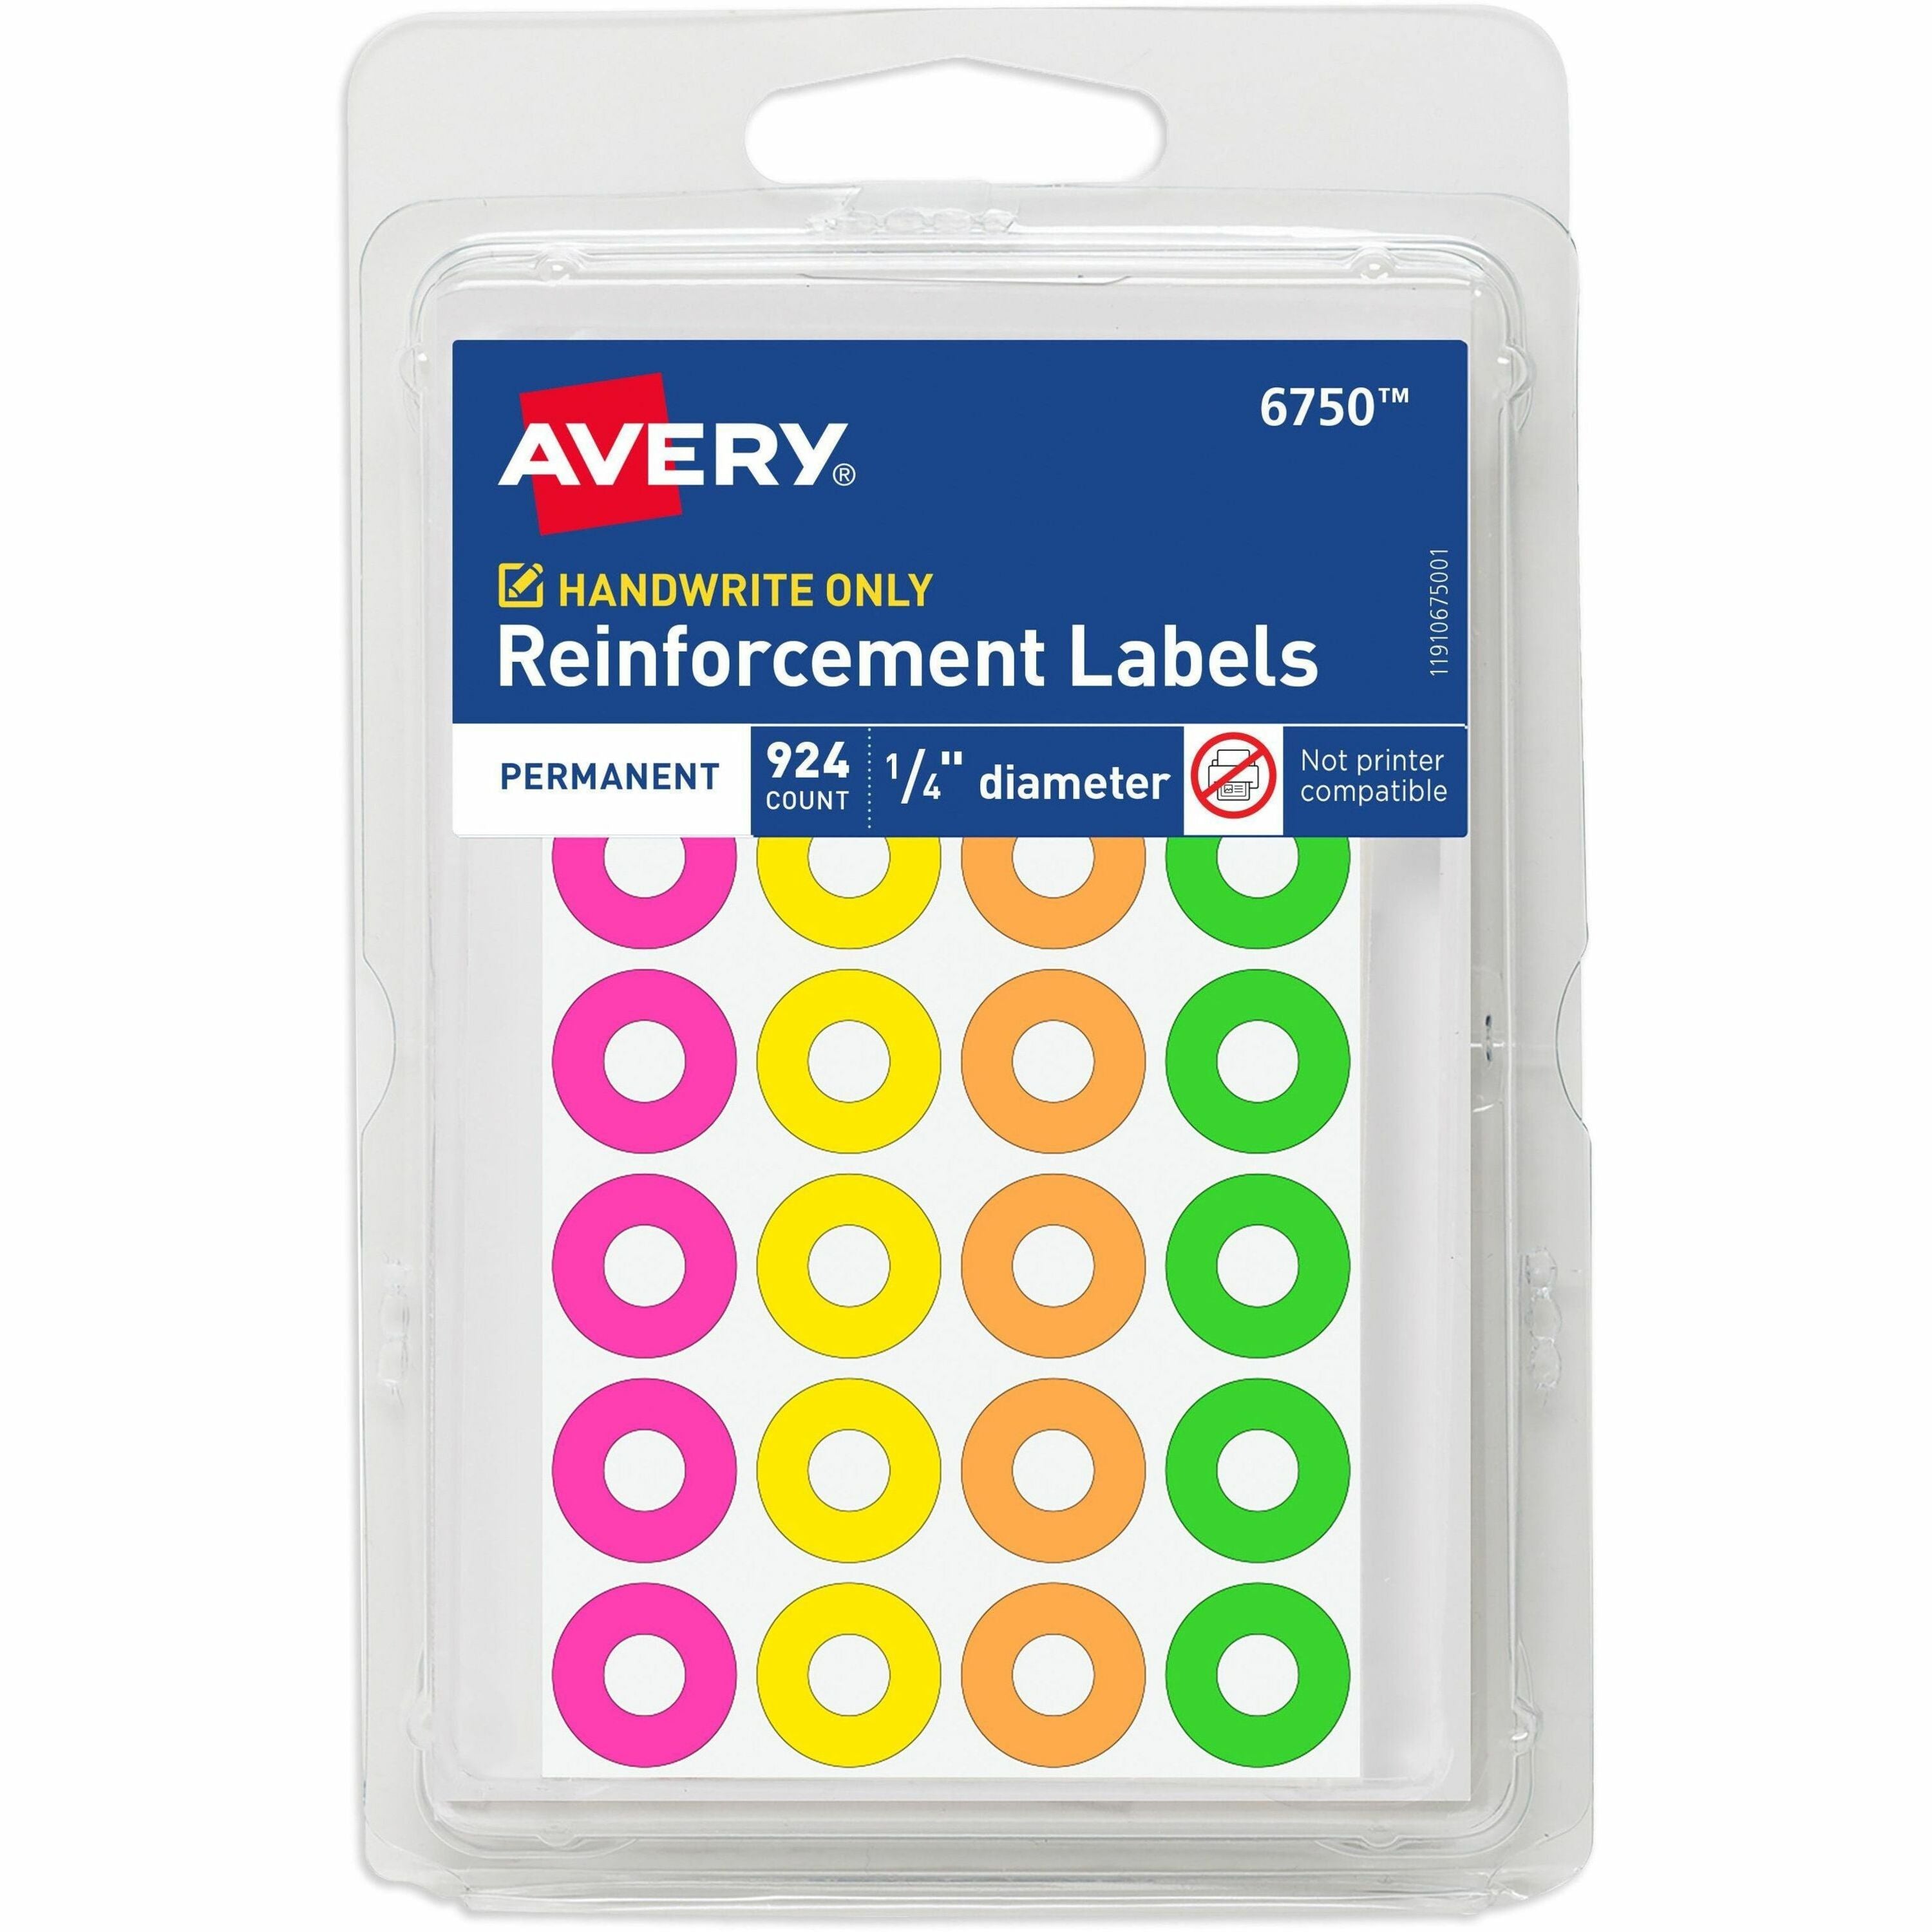 avery-reinforcement-labels-1-4-diameter-permanent-adhesive-assorted-neon-colors-non-printable-924-page-reinforcement-stickers-total-6750-avery-reinforcement-stickers-1-4--neon-924-total-6750_ave06750 - 1